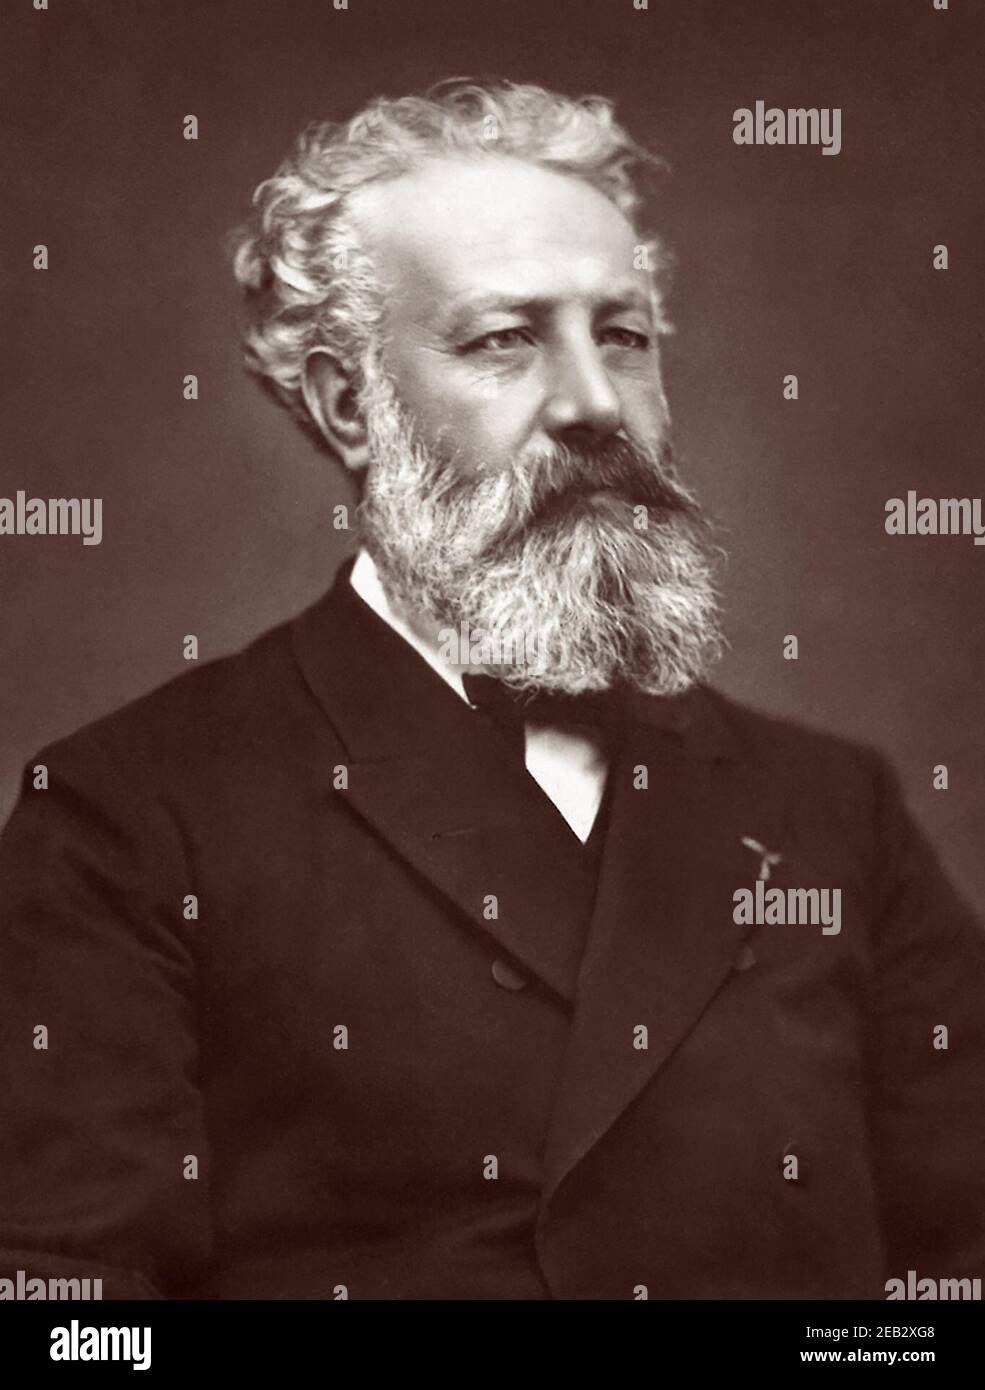 Jules Gabriel Verne (1828–1905), French novelist, poet, and playwright best known for his adventure novels Journey to the Center of the Earth (1864), Twenty Thousand Leagues Under the Seas (1870), and Around the World in Eighty Days (1872). Photo c1876 by Étienne Carjat. Stock Photo